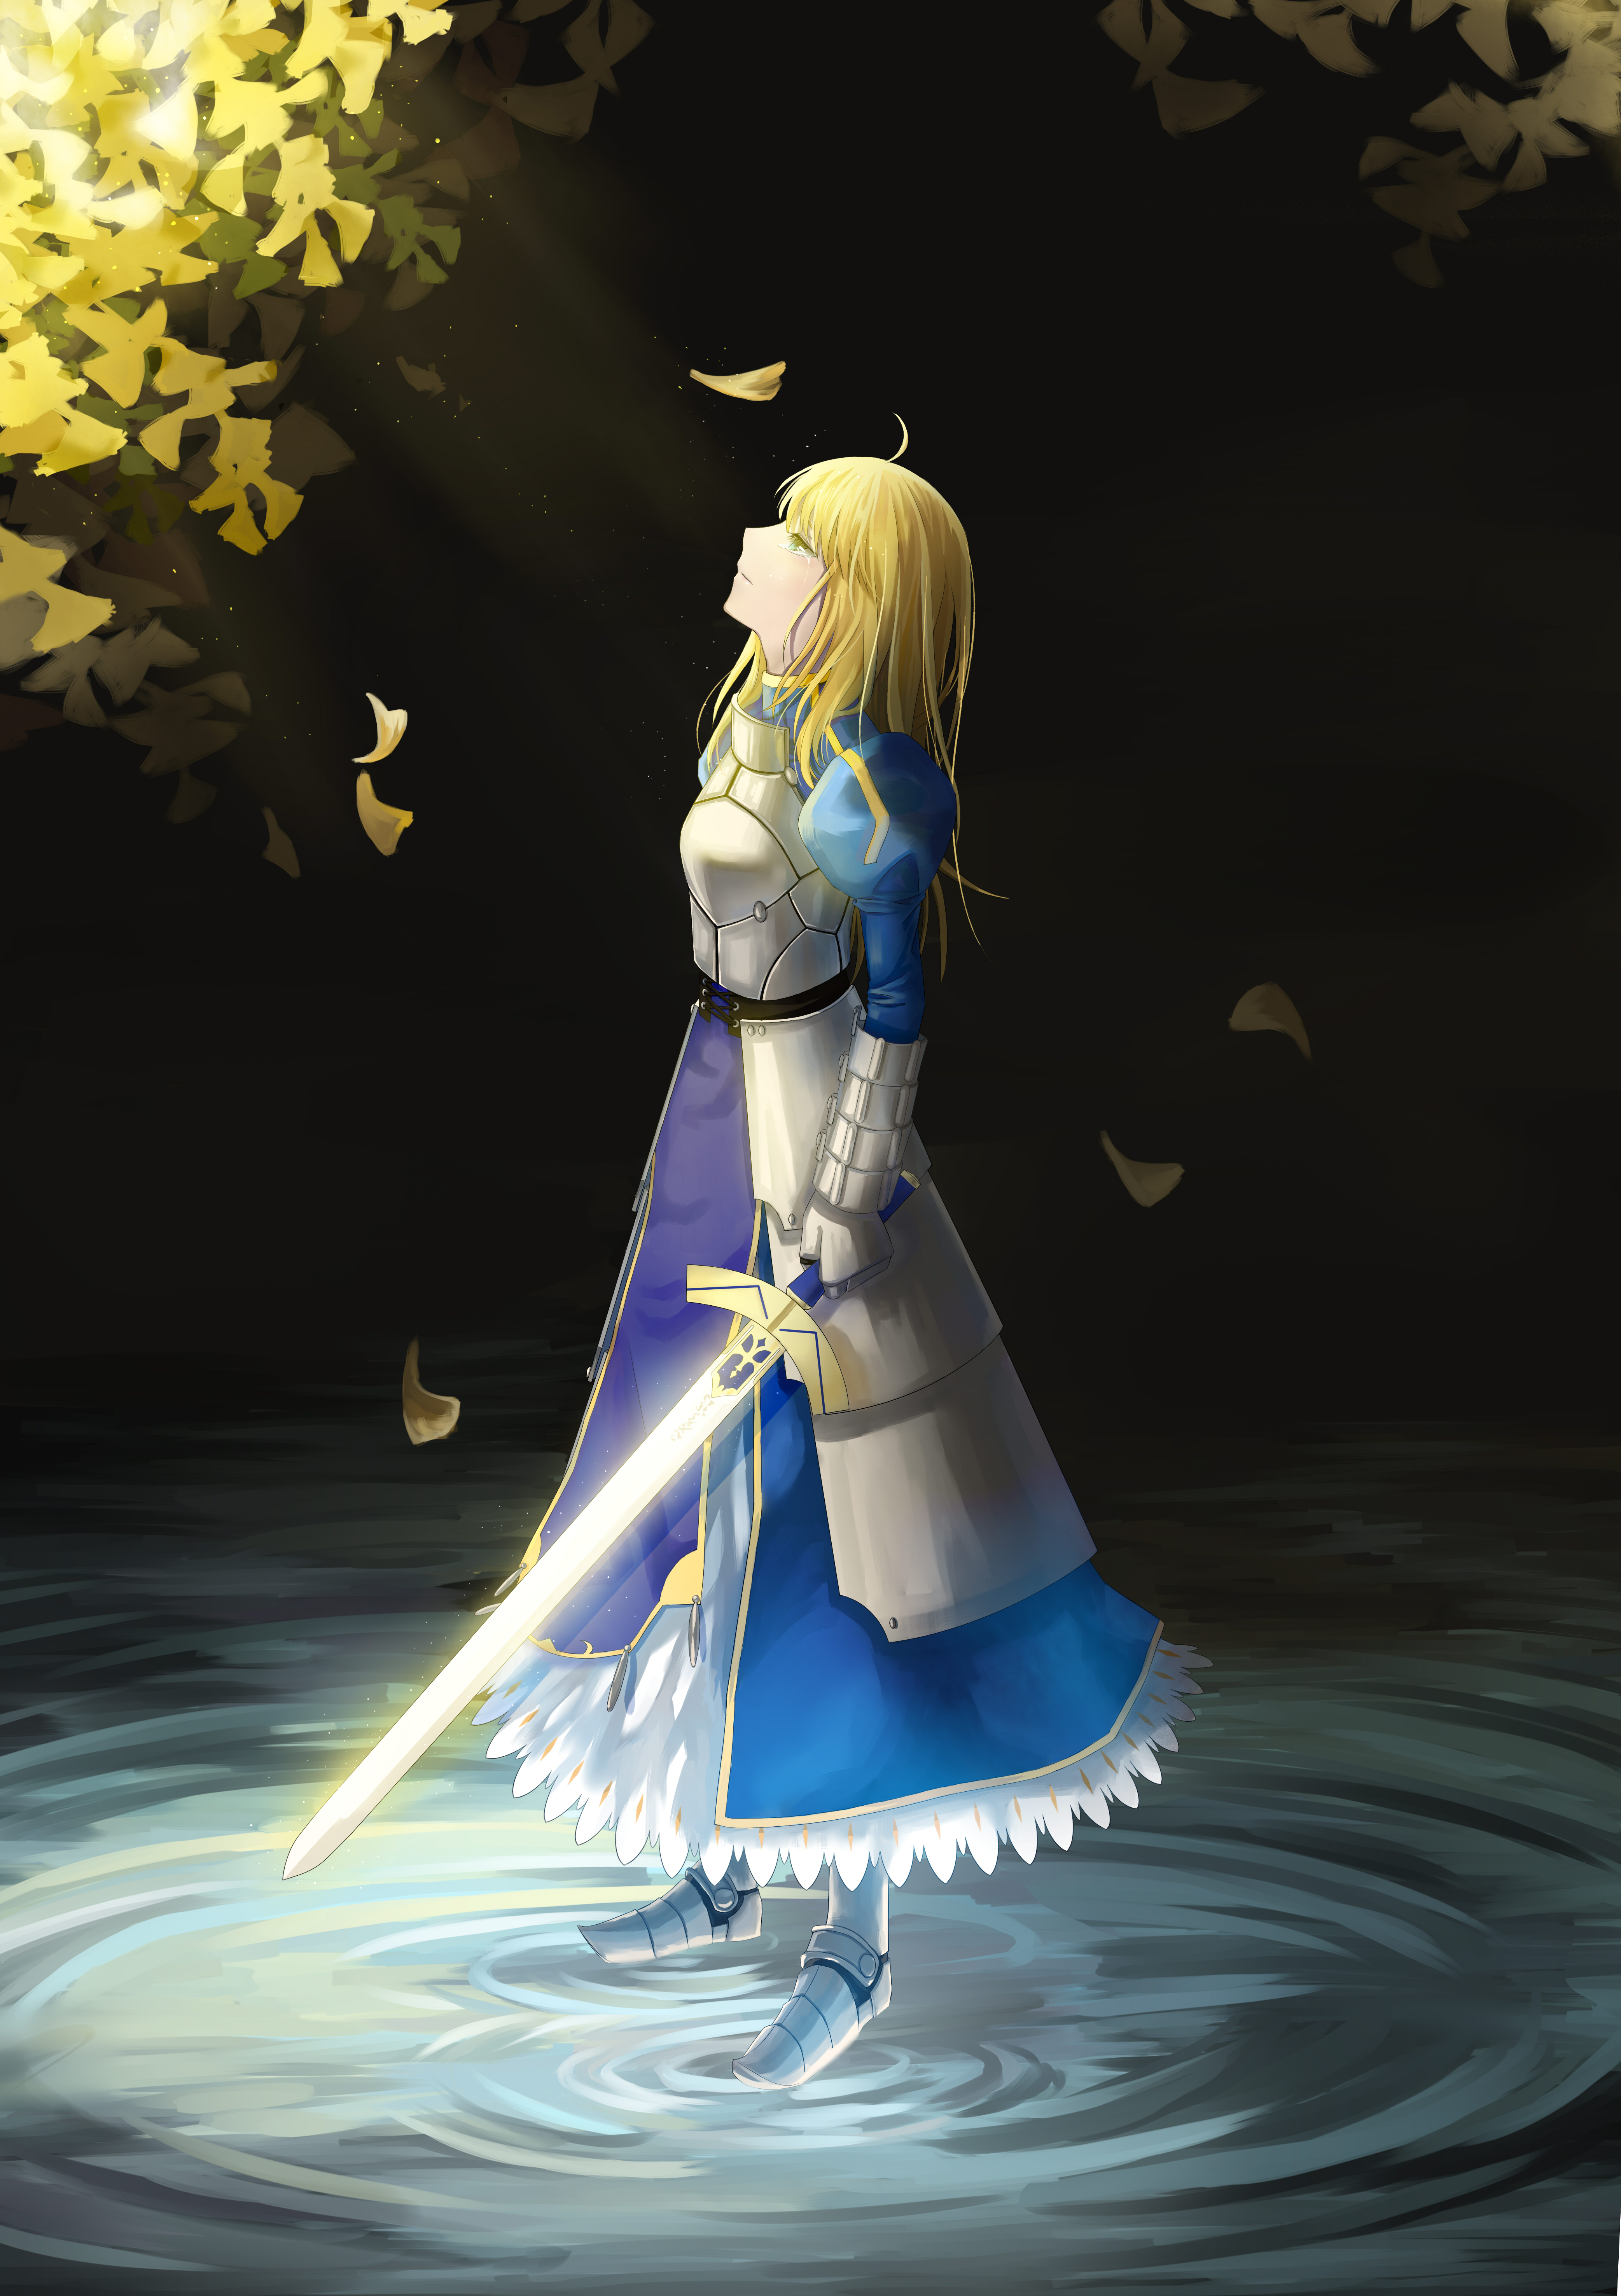 Anime 4169x5905 Fate series Fate/Stay Night Fate/Zero anime girls 2D female warrior long hair women with swords armor Excalibur blue dress fantasy weapon green eyes crying Saber forest portrait display fan art blonde Artoria Pendragon